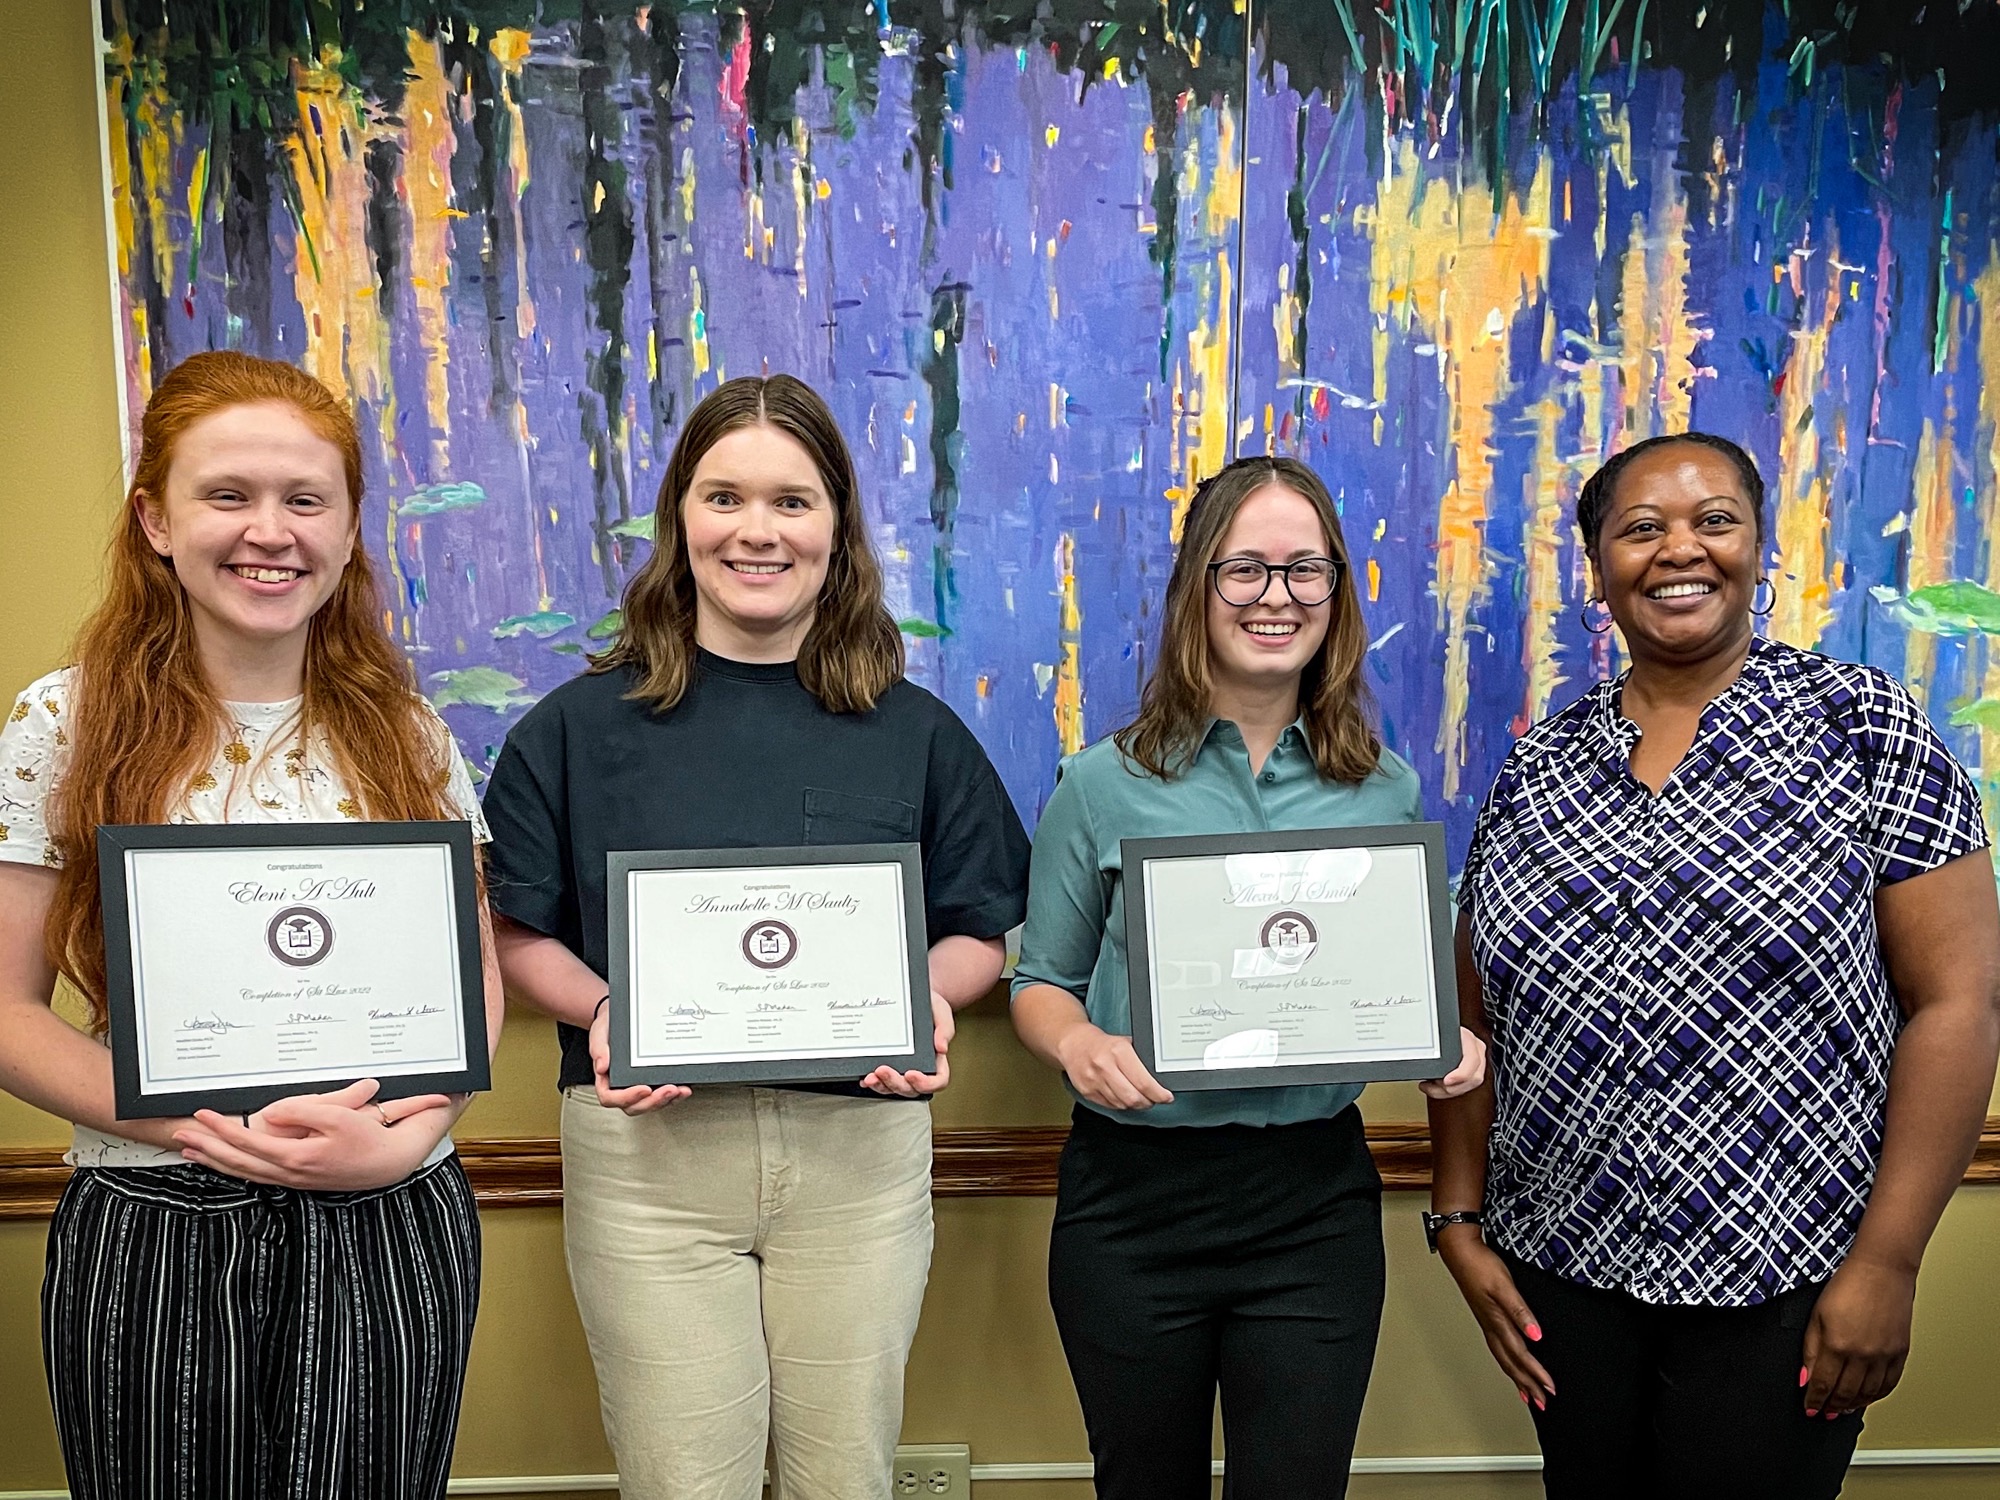 From L to R: Eleni Ault, Annabelle Saultz. Lexi Smith, and Carla Sarratt (Director of Library Services at the University of Mount Union)